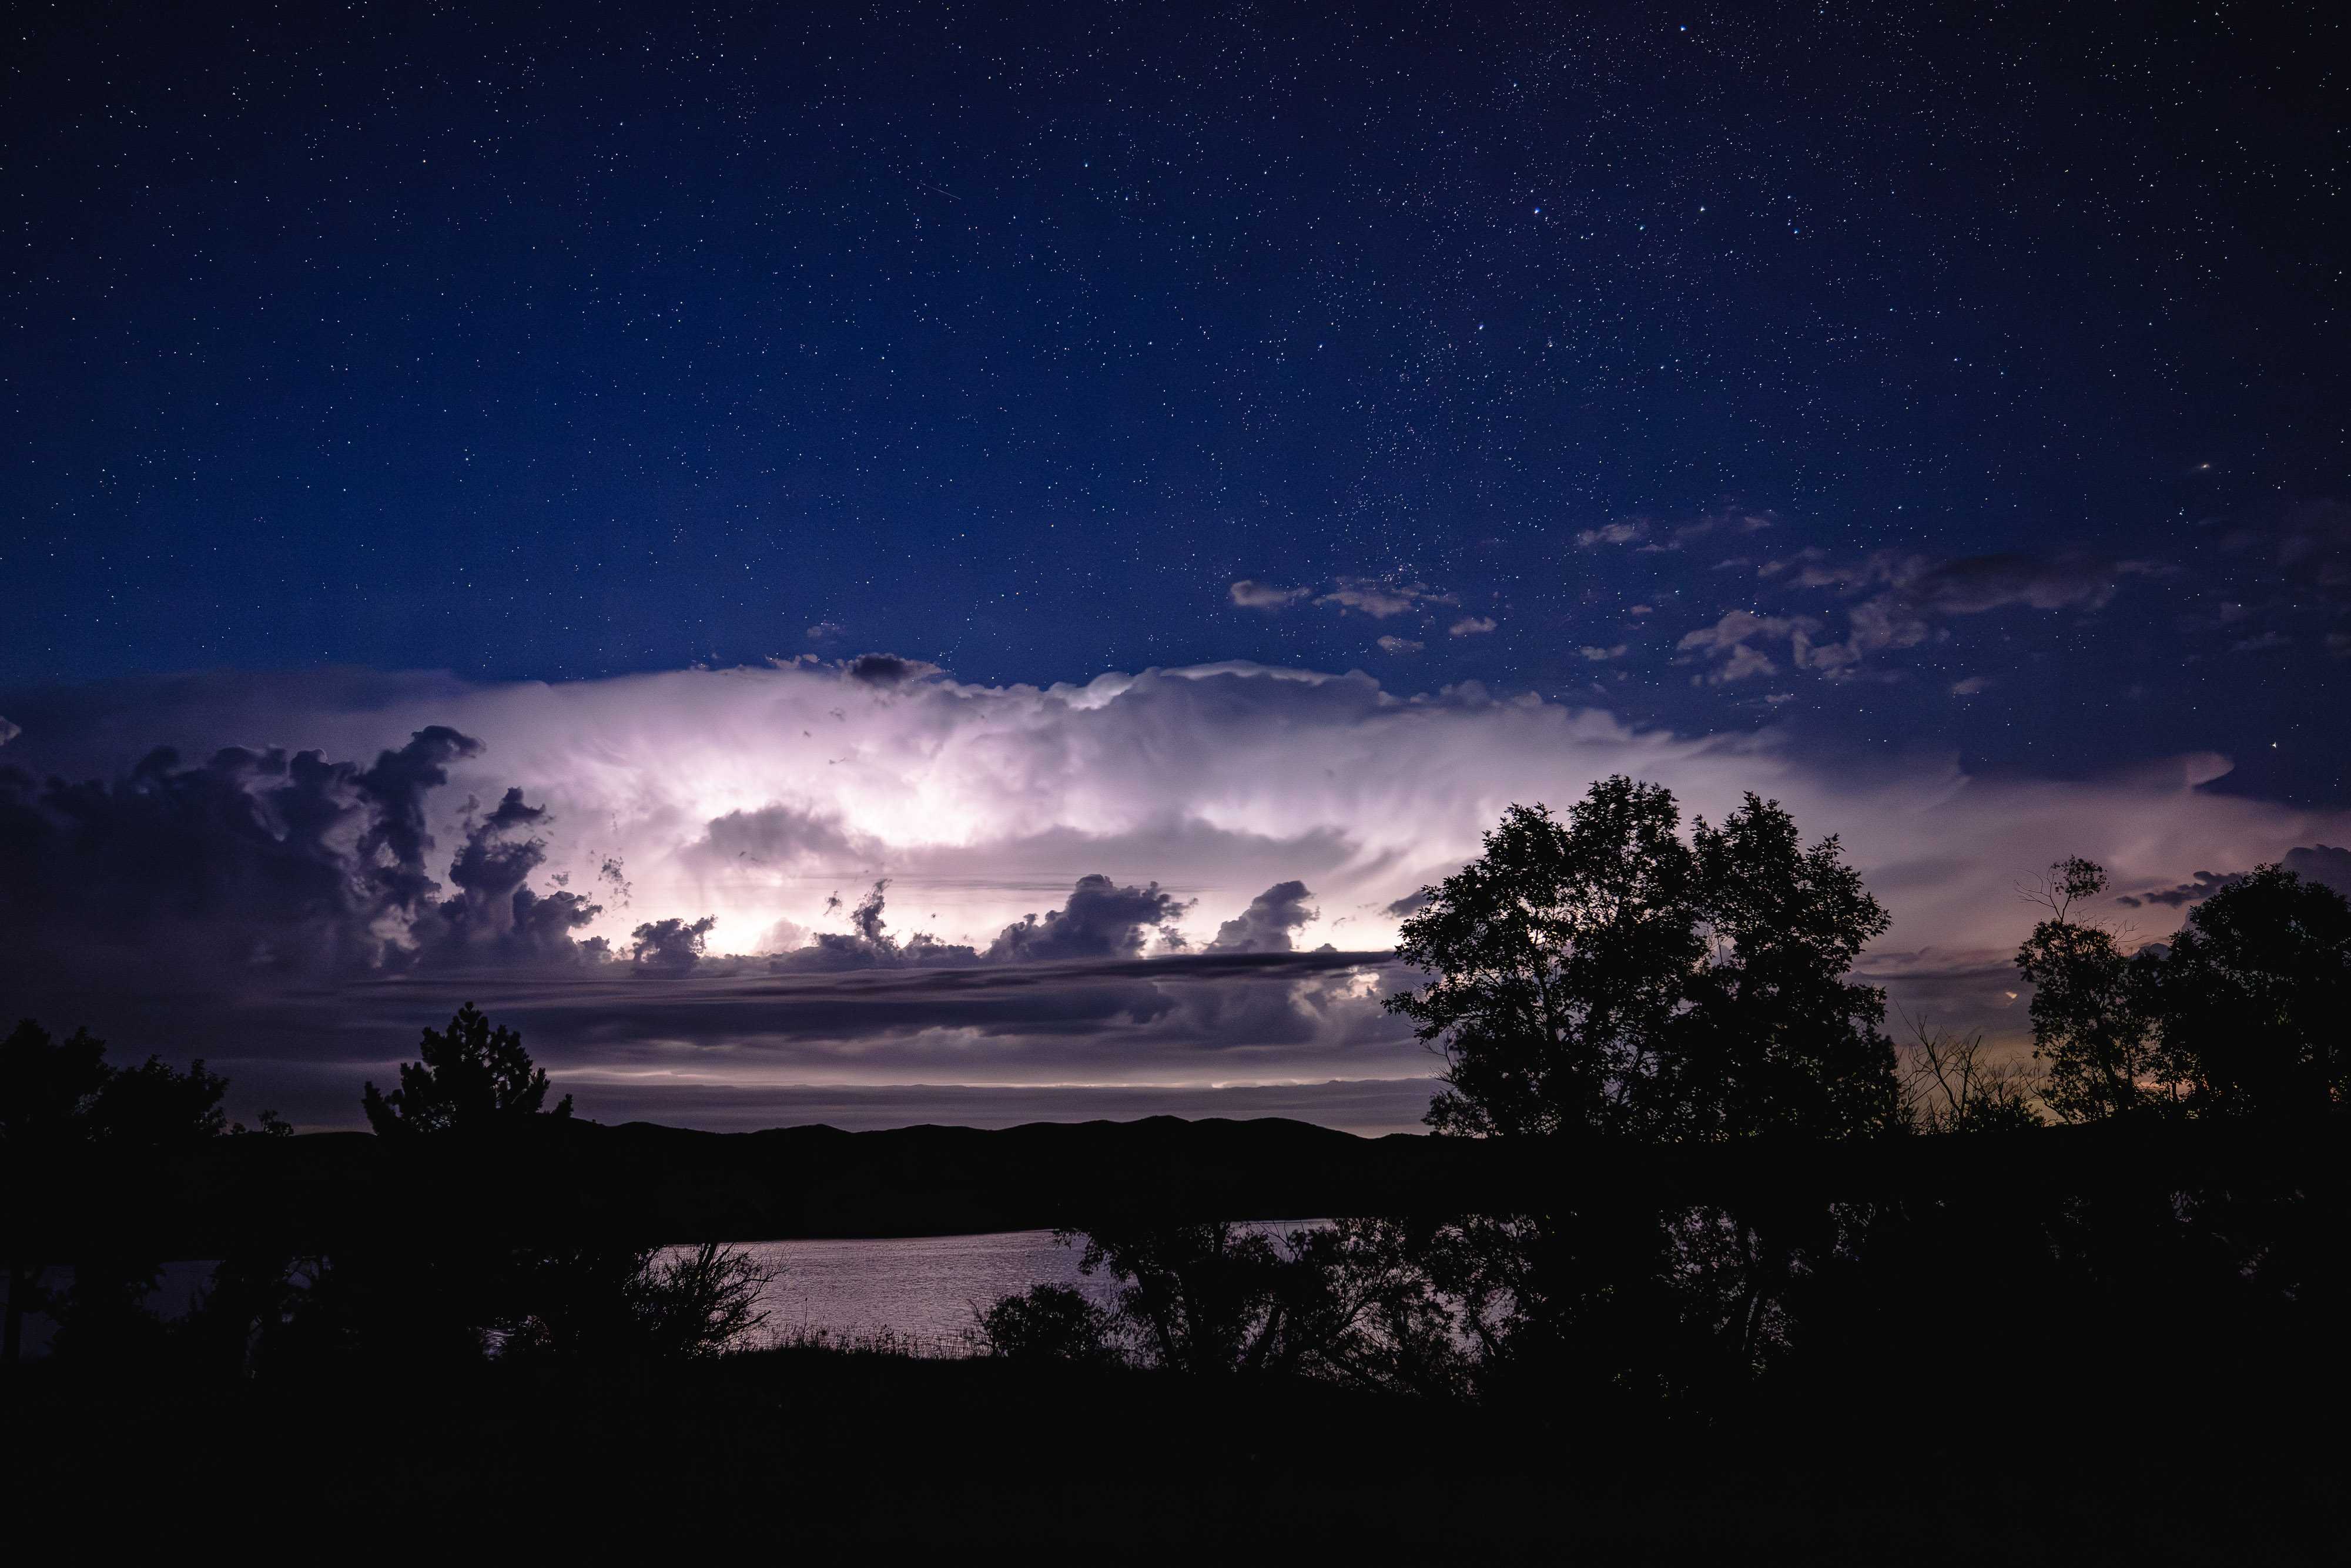 Fluffy clouds are lit by lightning flashes in front of a deep blue sky filled with stars